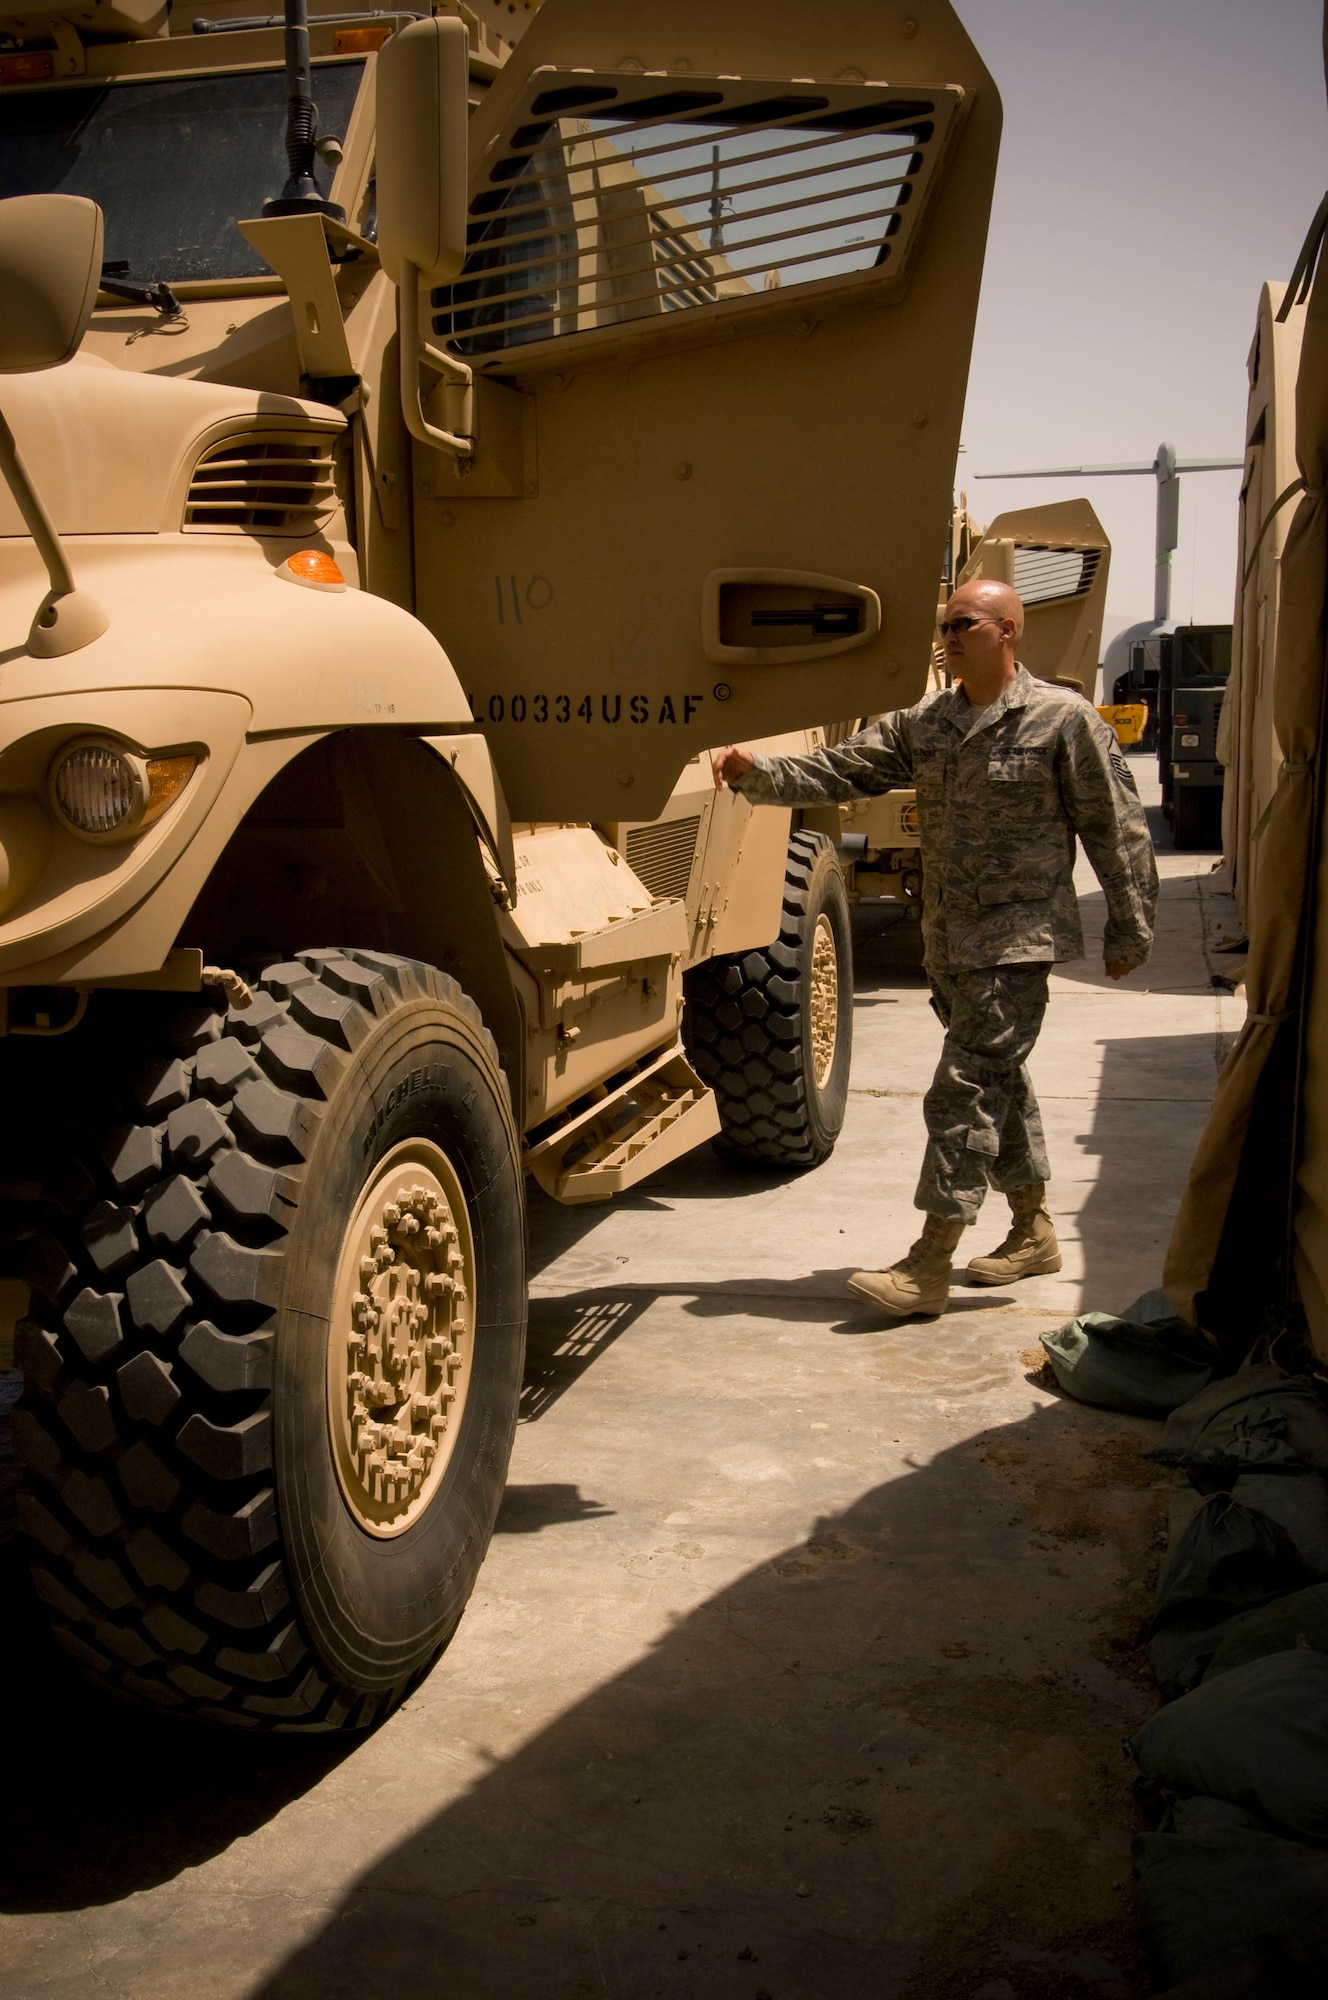 BAGRAM AIR FIELD, Afghanistsan -- Master Sgt. Brian Spalinger, 455th Expeditionary Logistics Readiness Squadron, performs a serviceability inspection on the MaxxPro mine-resistant ambush-protected vehicle in the vehicle maintenance yard at Bagram Air Field, Afghanistan. Airmen in the 455th Air Expeditionary Wing welcomed the first of many MRAPs designed to protect them from roadside bombs while conducting missions outside the wire. (U.S. Air Force photo by Staff Sgt. Rachel Martinez/Released)